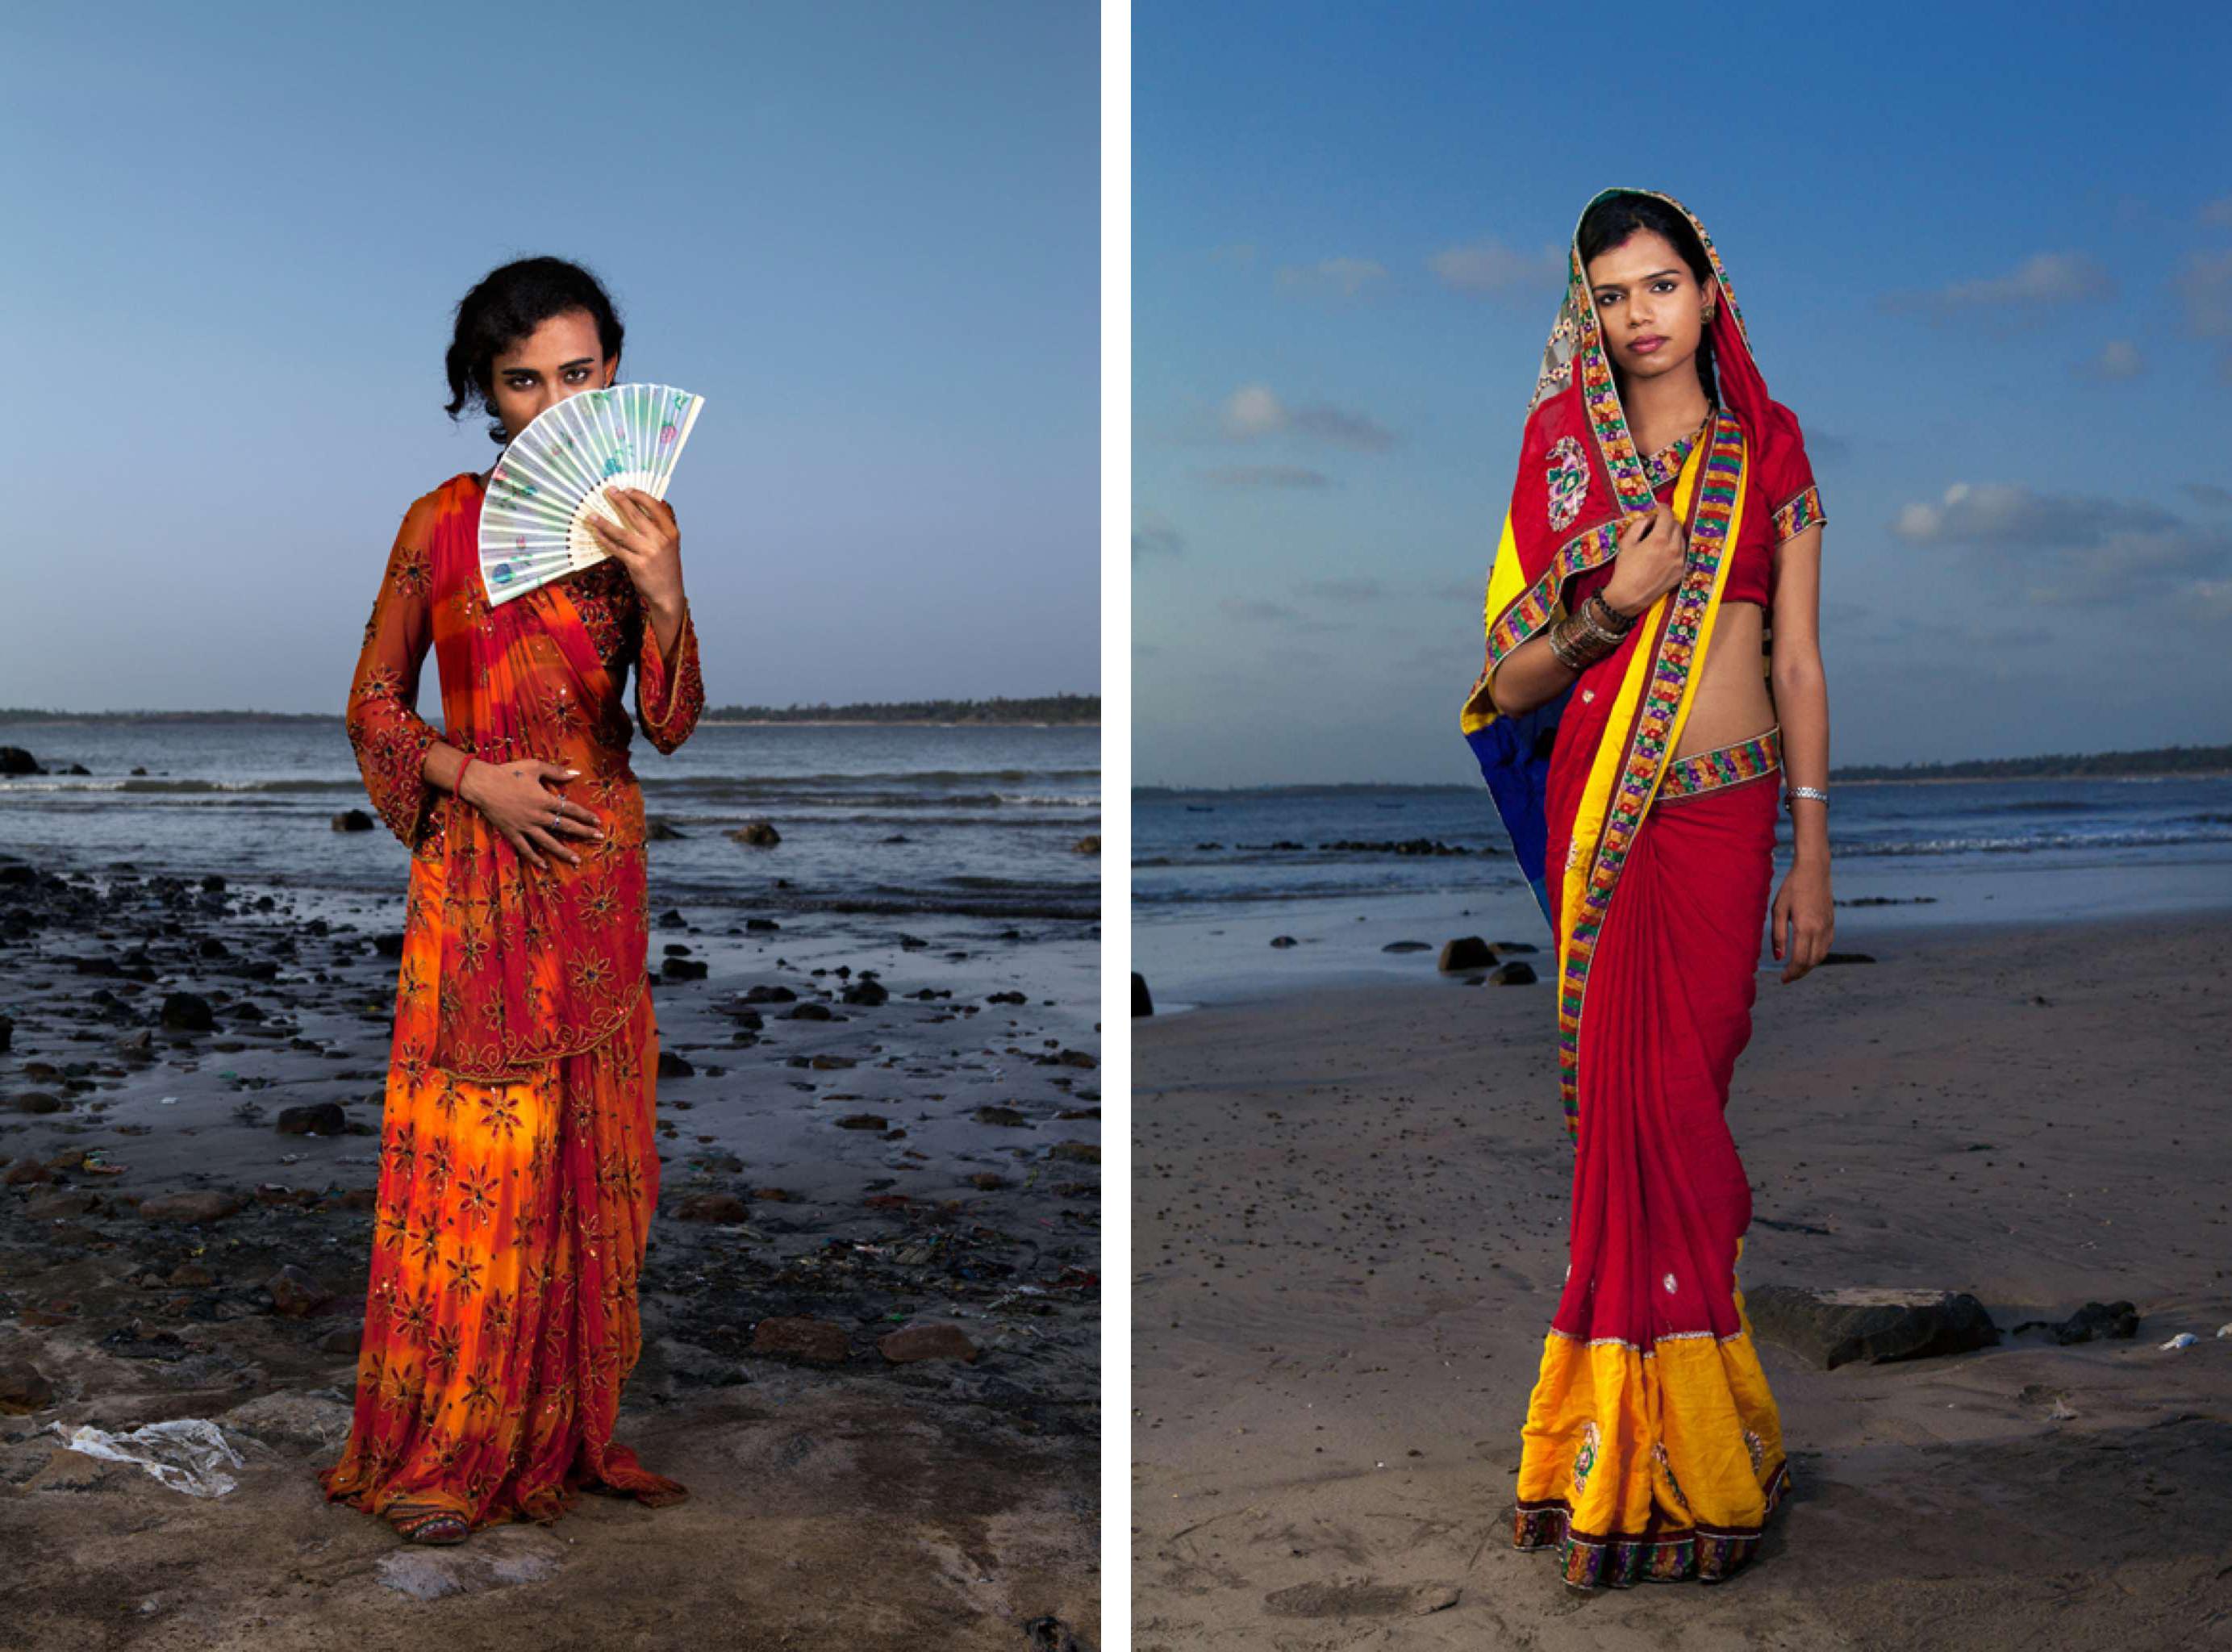 Jill Peters Color Photograph - Vijay and Julie, Protrait. From The Series The Third Gender of India